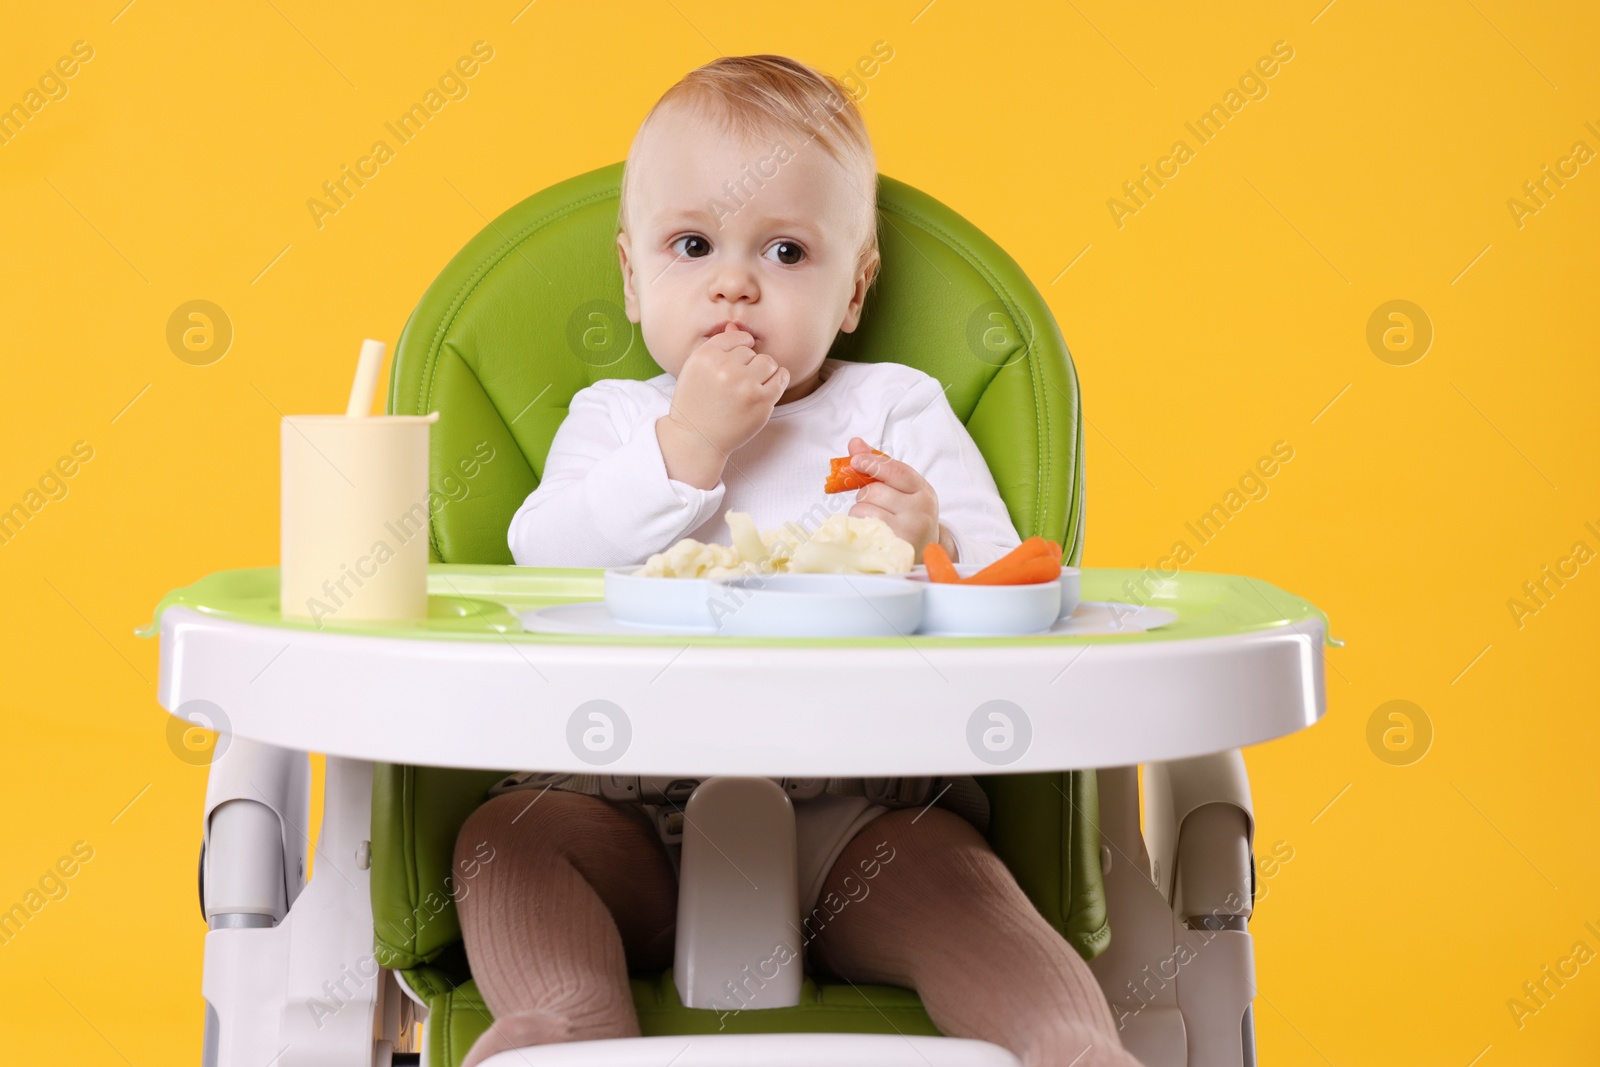 Photo of Cute little baby eating healthy food in high chair on orange background